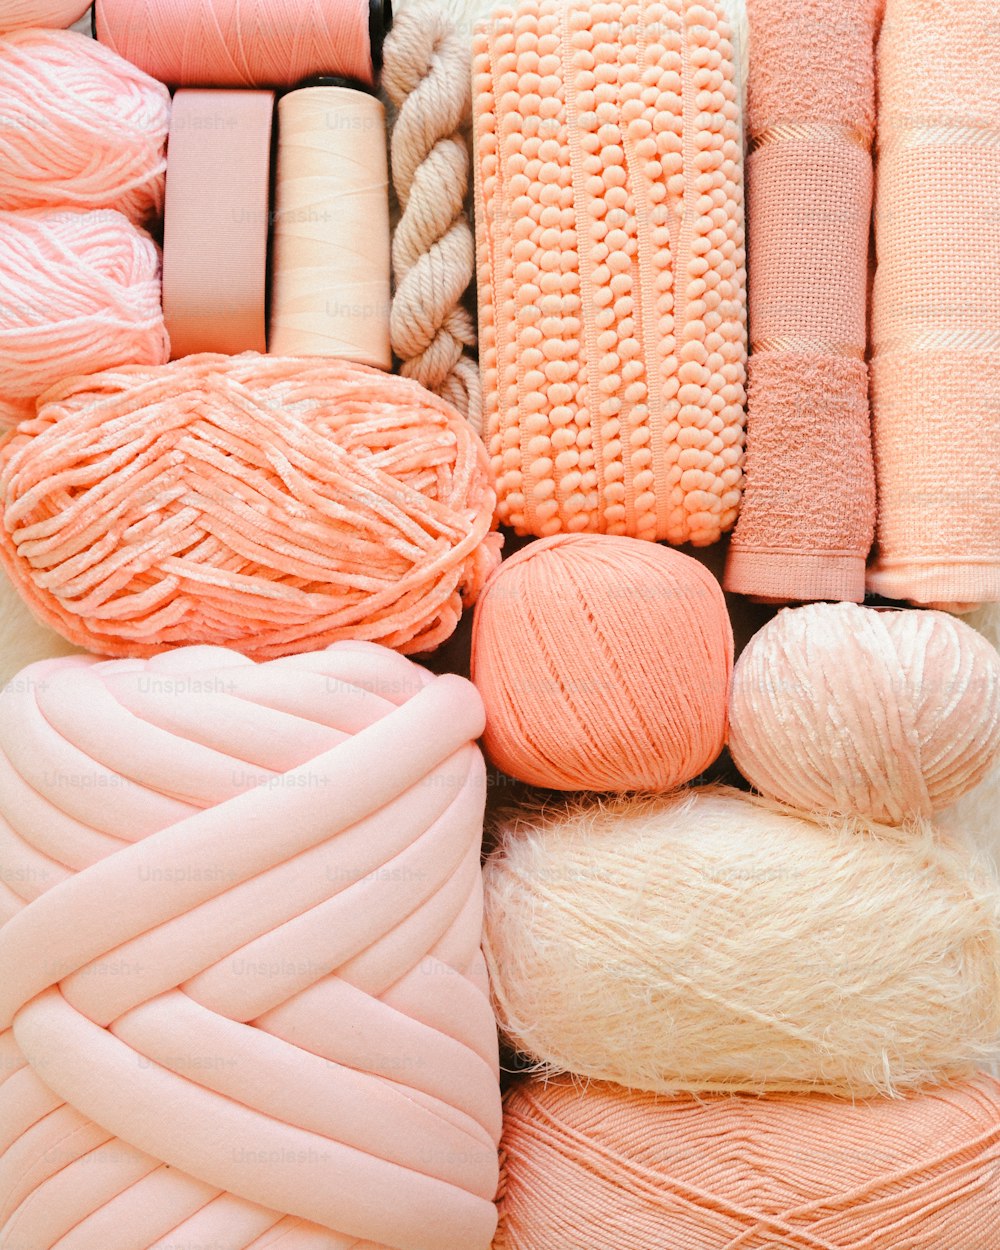 Crochet Yarn Pictures  Download Free Images on Unsplash